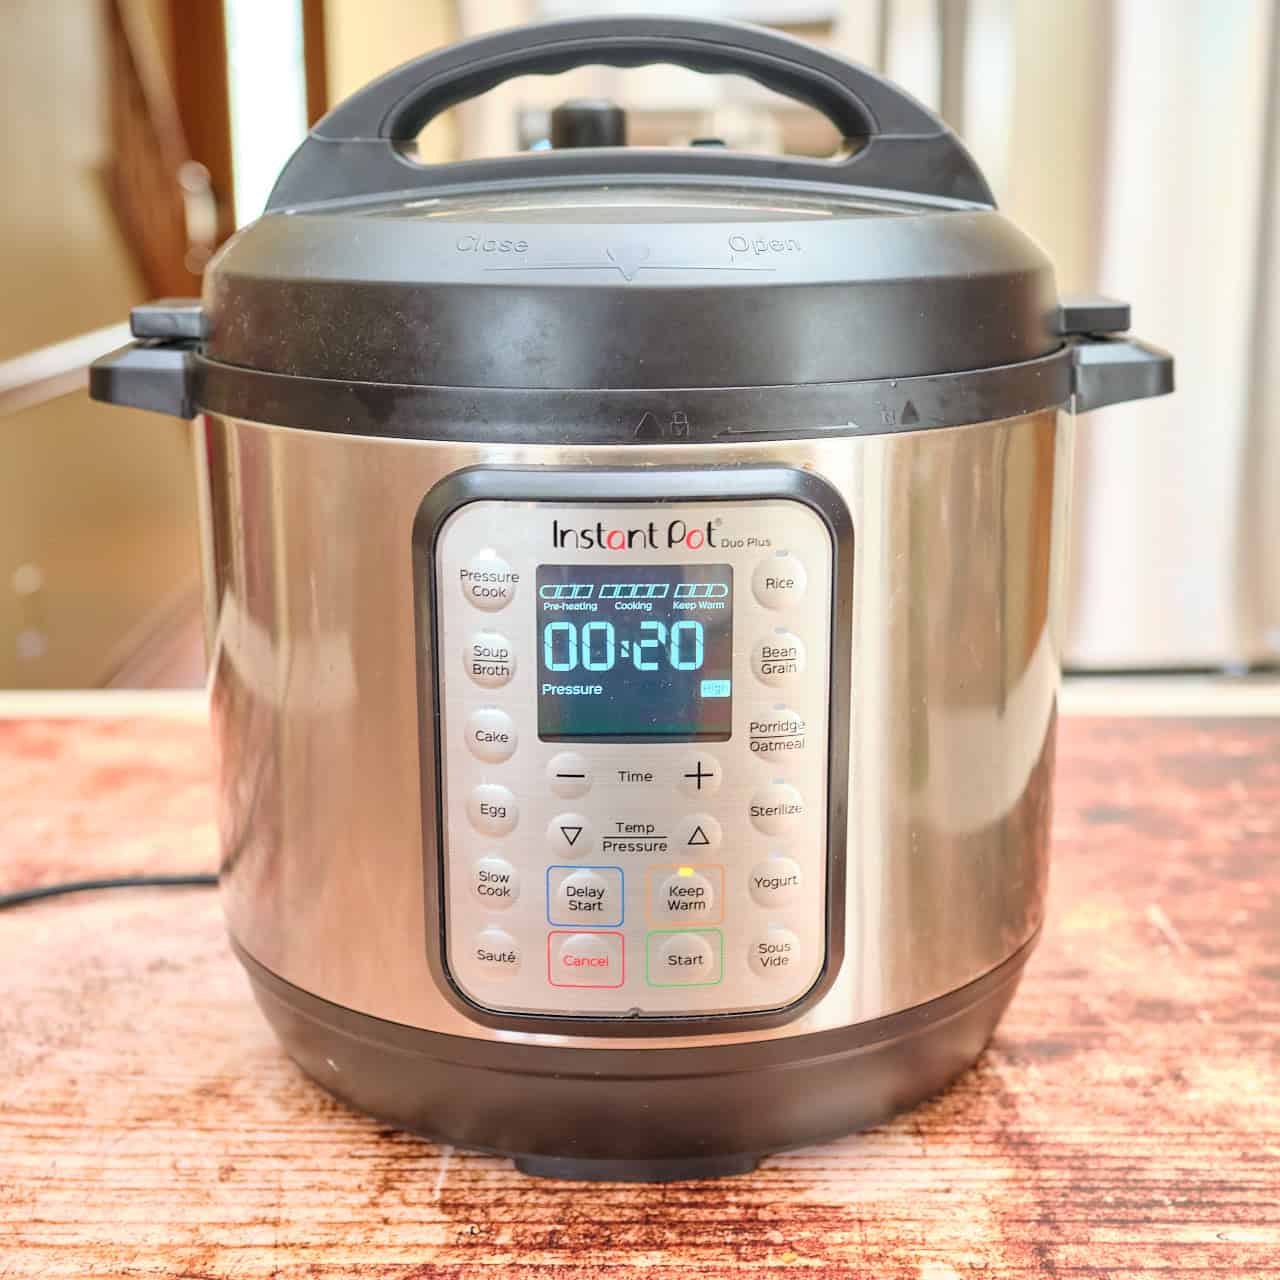 Pressure cook for 20 minutes with a natural pressure release